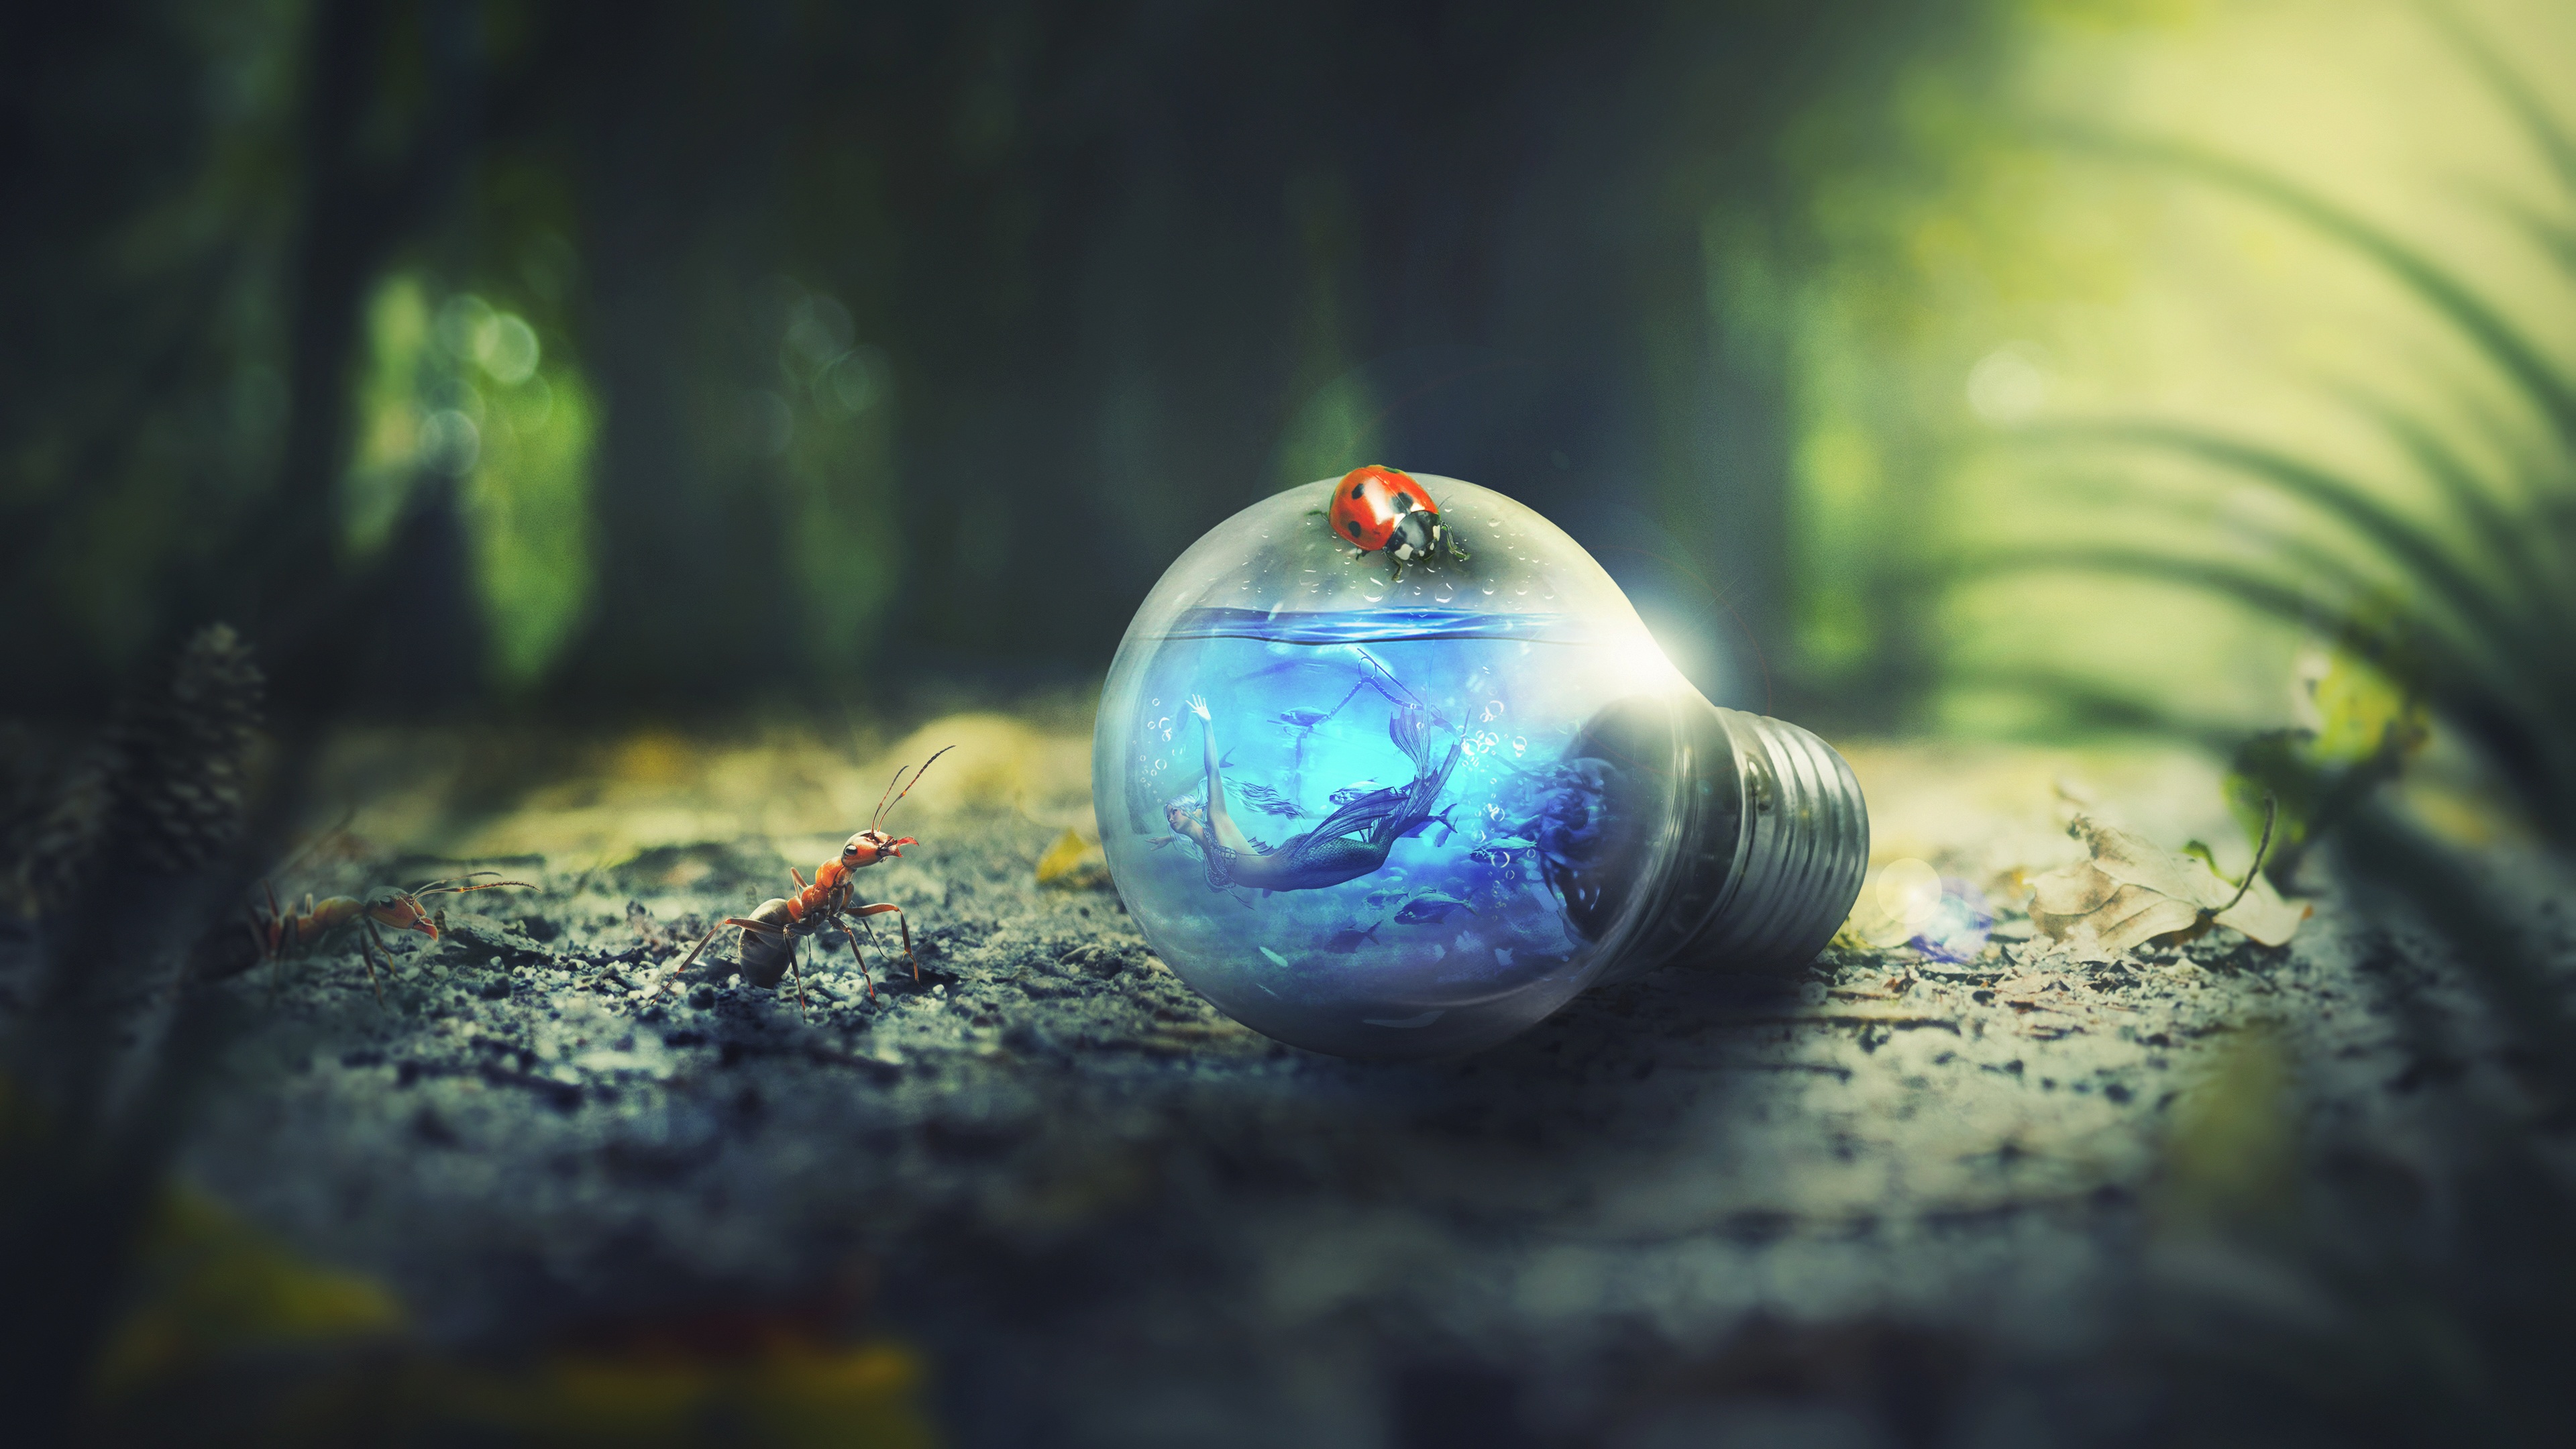 background wallpaper for photoshop,light,natural environment,sphere,photography,macro photography